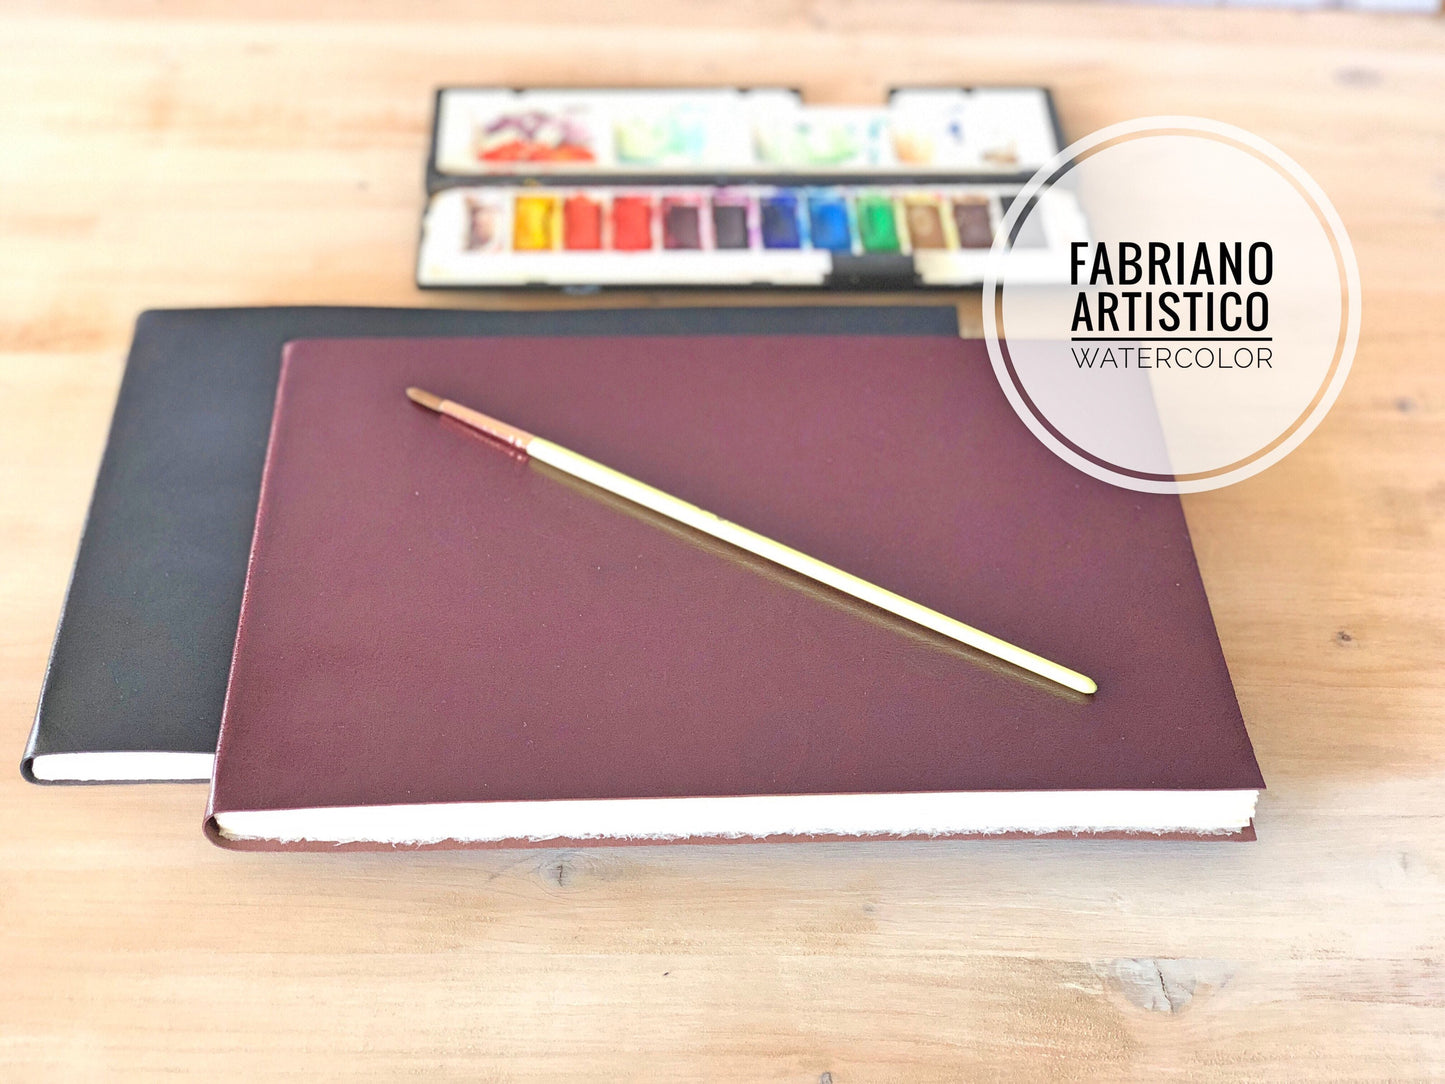 Large Pl Leather Sketchbook with Cotton Watercolor Paper in Landscape Format,  Softcover Travel Botanical Journal,  Fabriano Fine Arts Paper